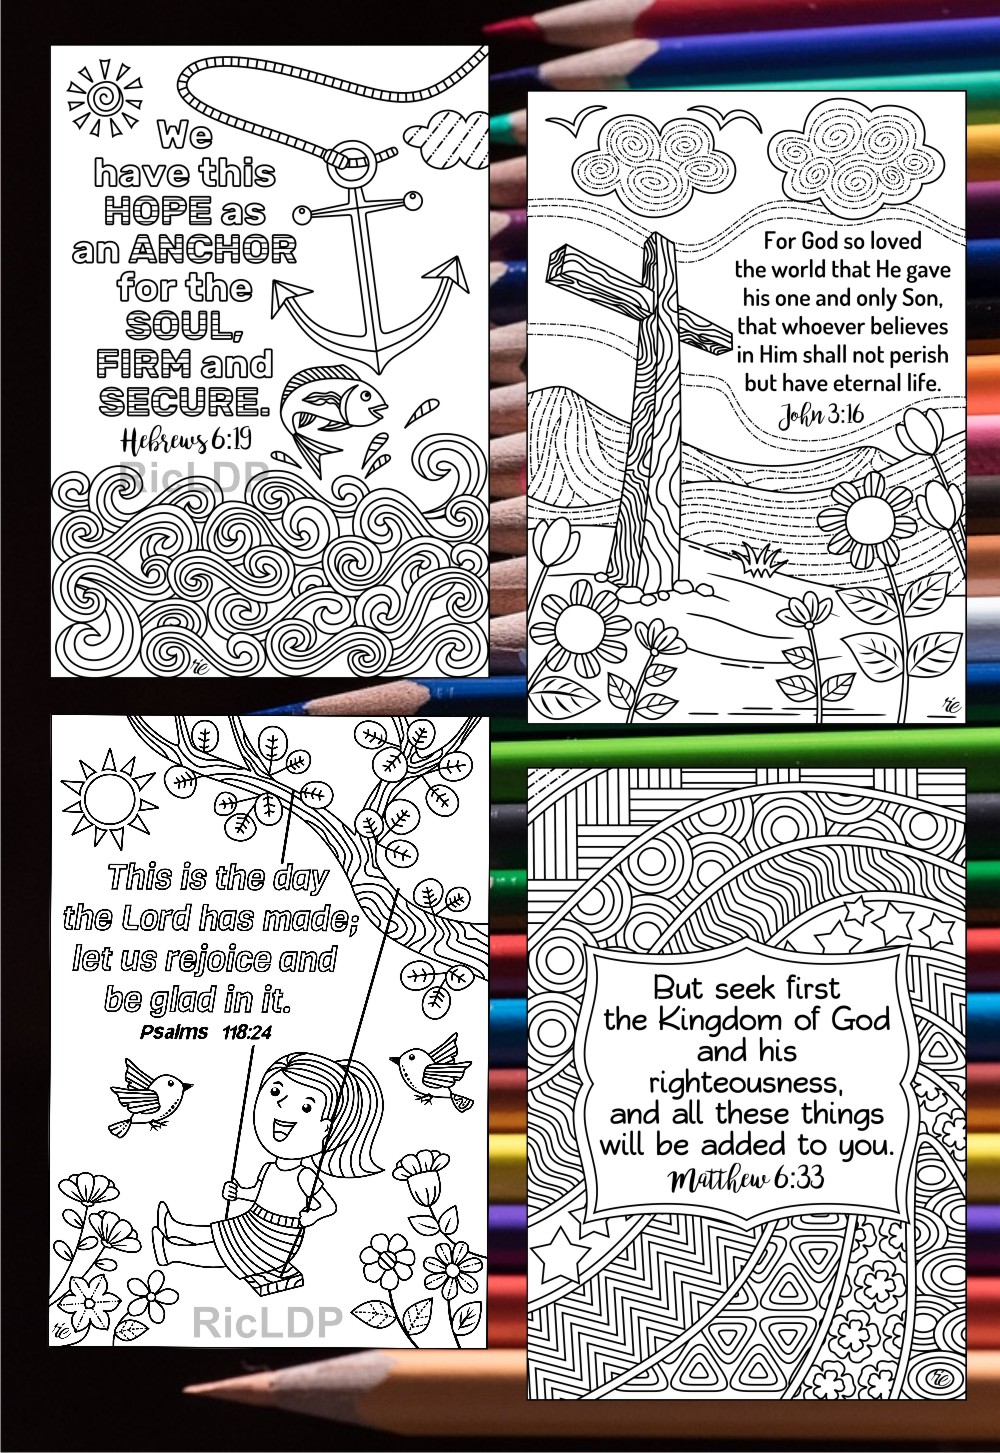 ricldp-artworks-coloring-scripture-cards